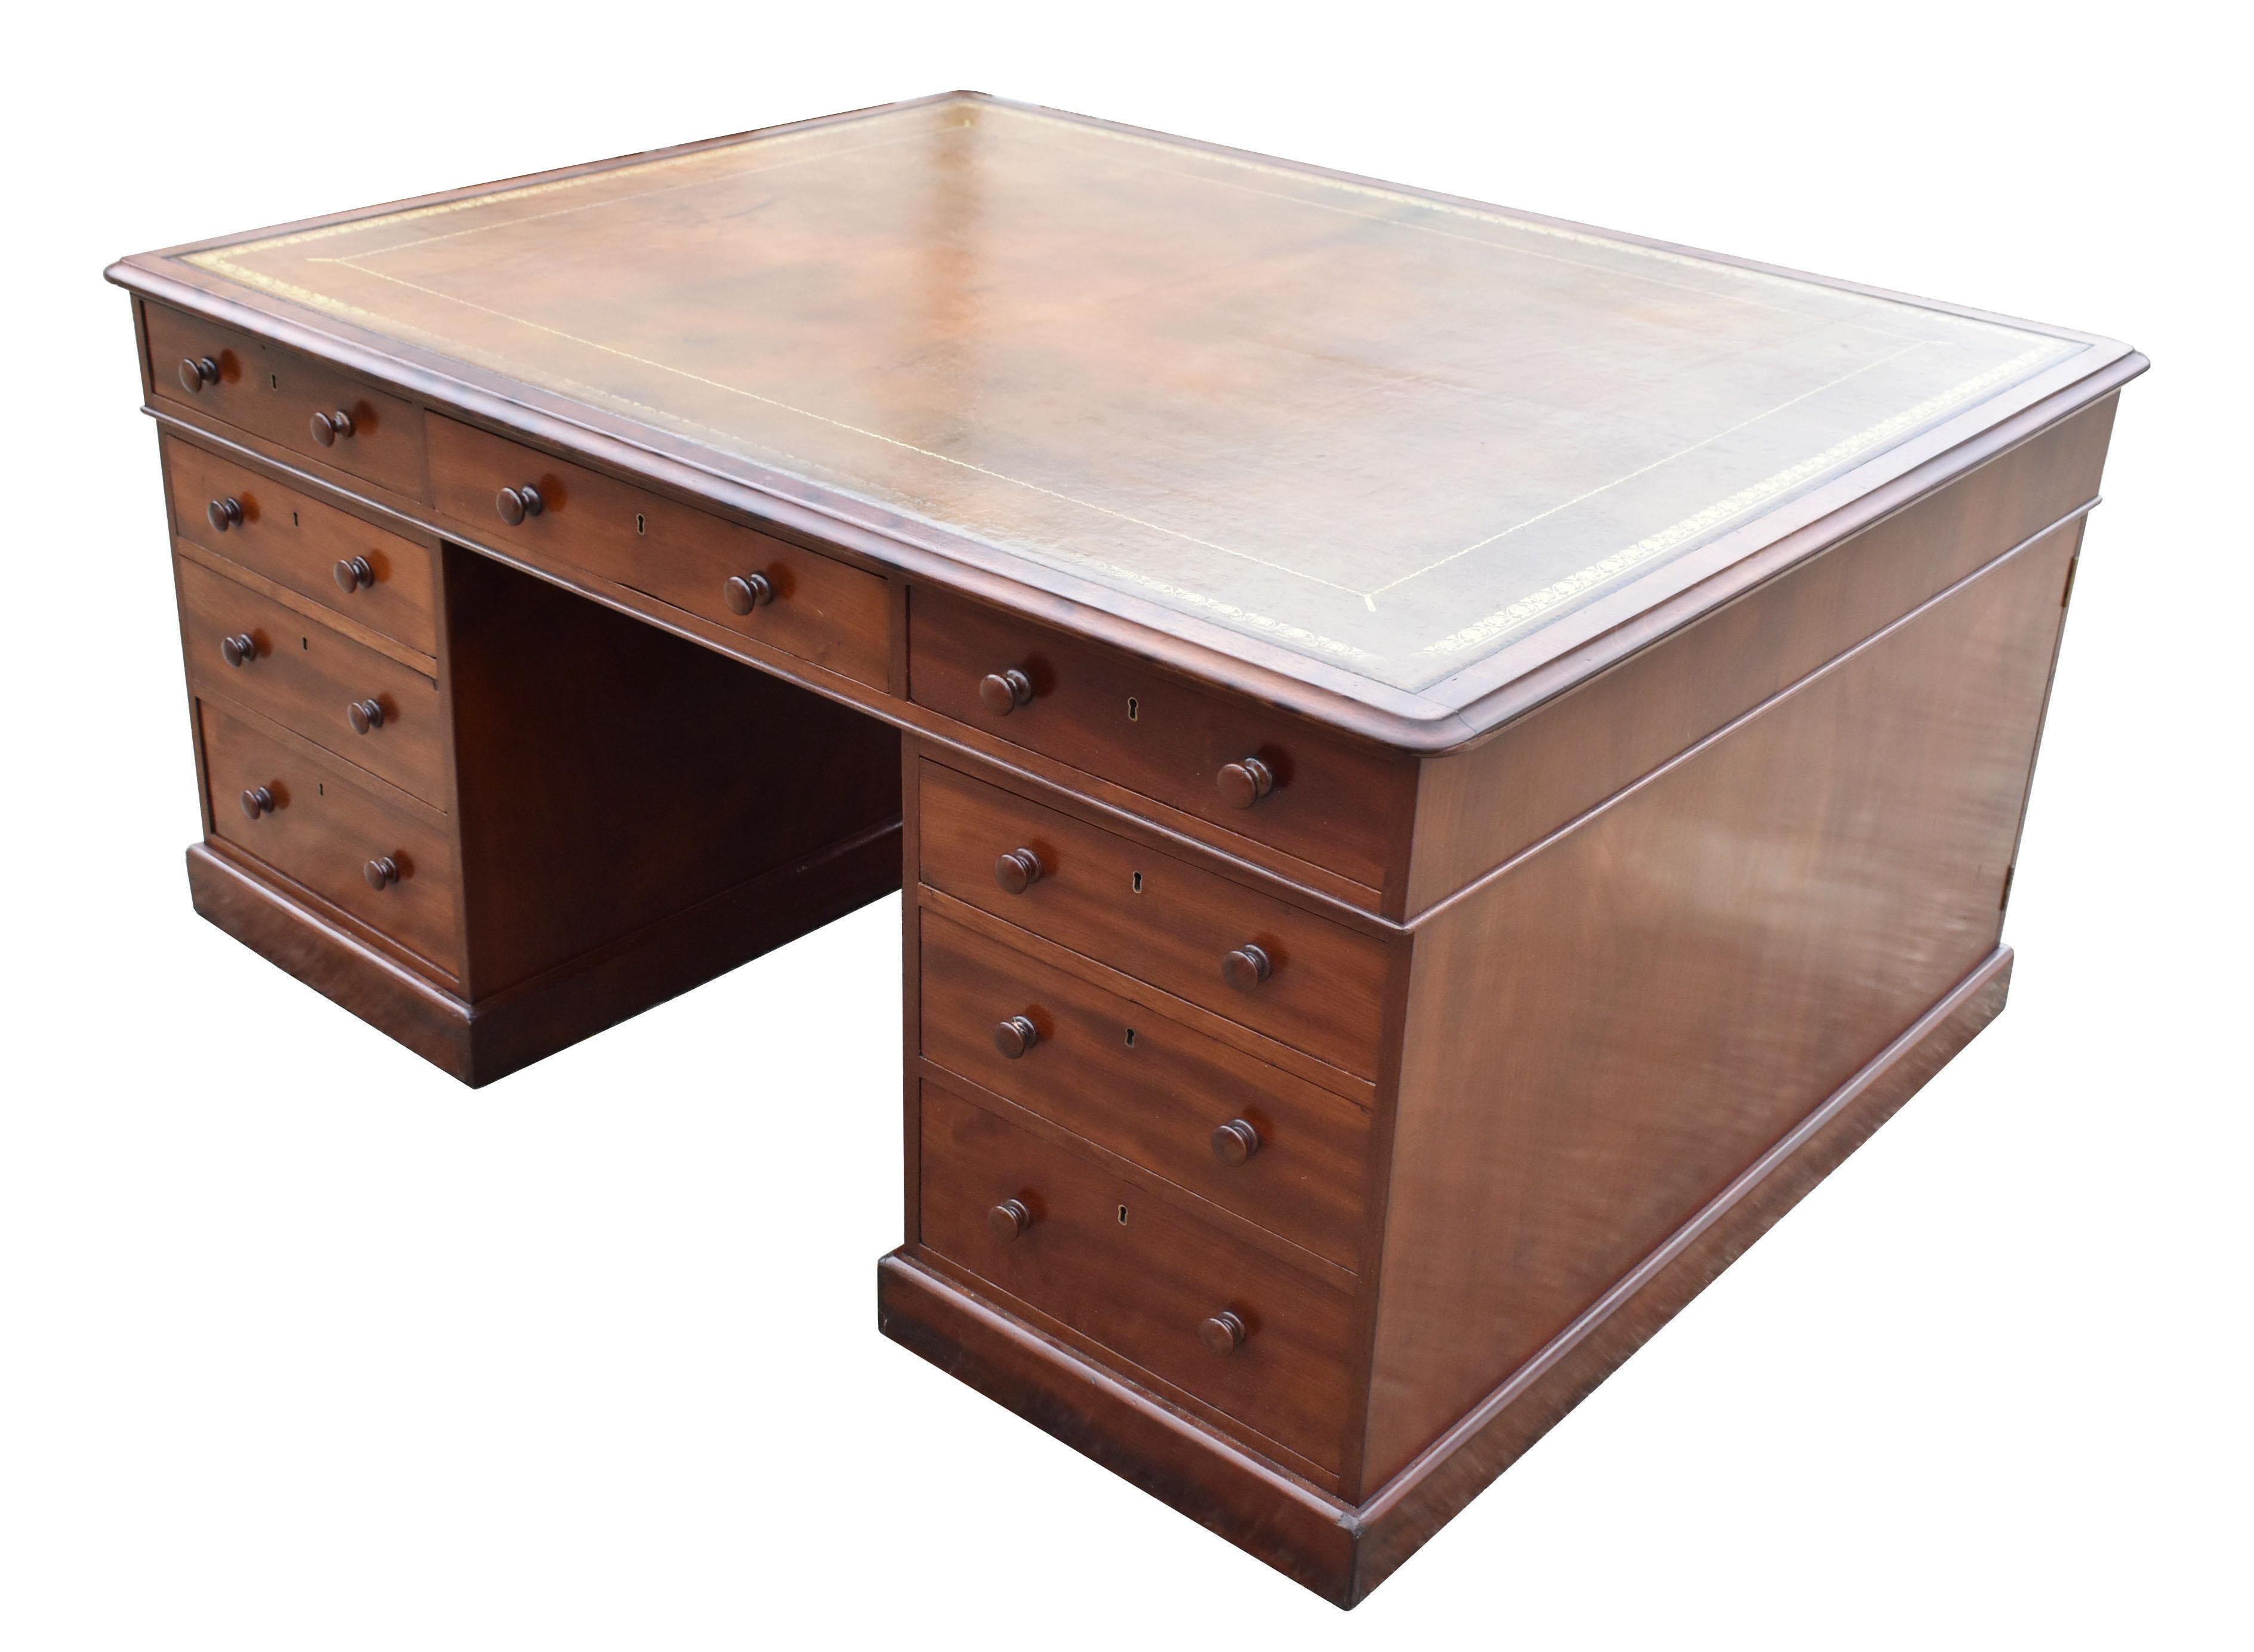 For sale is a good quality Victorian mahogany partners desk, having an inset leather hide writing surface, decorated with gold tooling. This is above three drawers, with a further three drawers on the opposing side. The desk top fits onto two